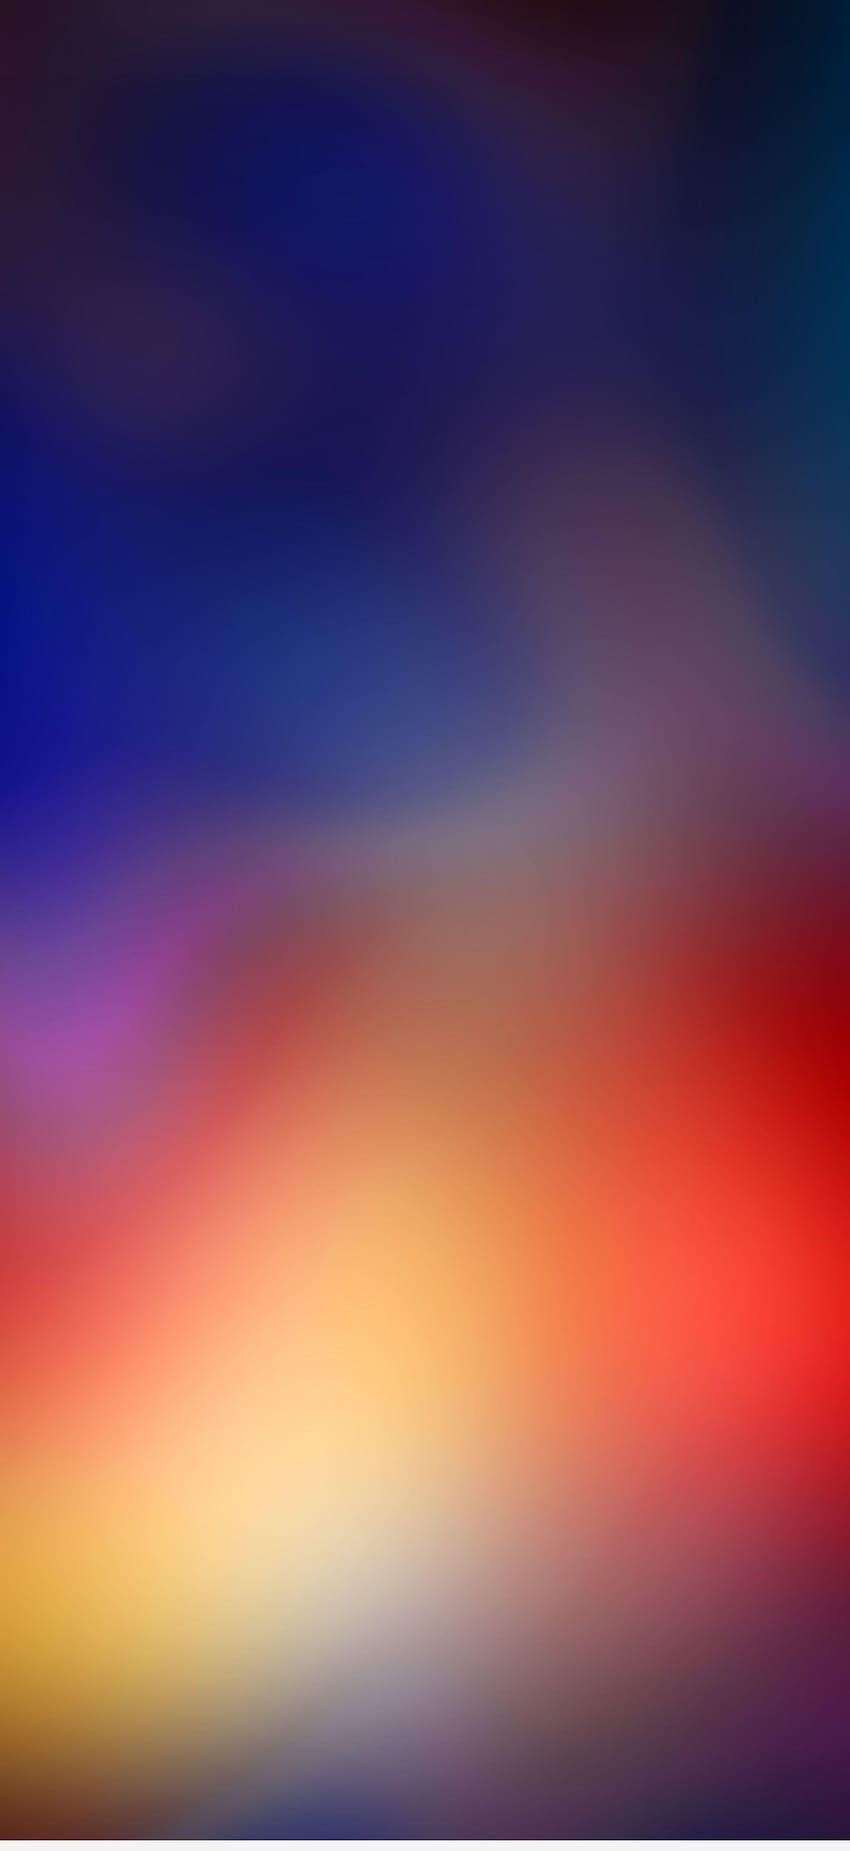 iphone x abstract blue backgroud, , iphone x HD phone wallpaper